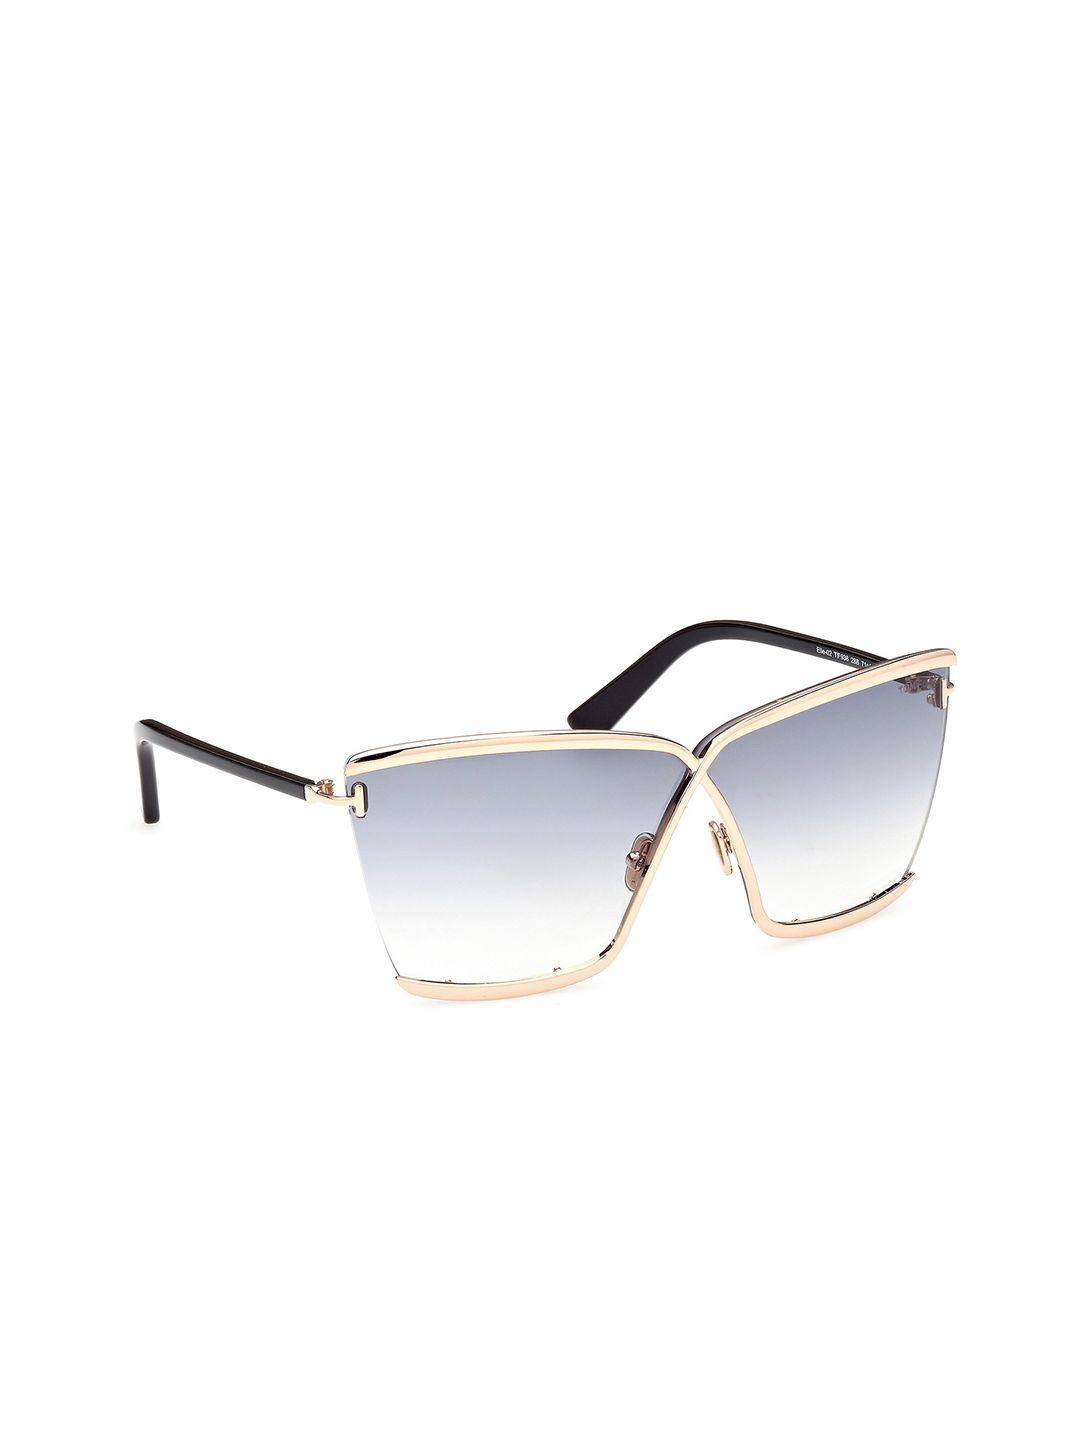 tom ford women square sunglasses with uv protected lens-ft0936 71 28b